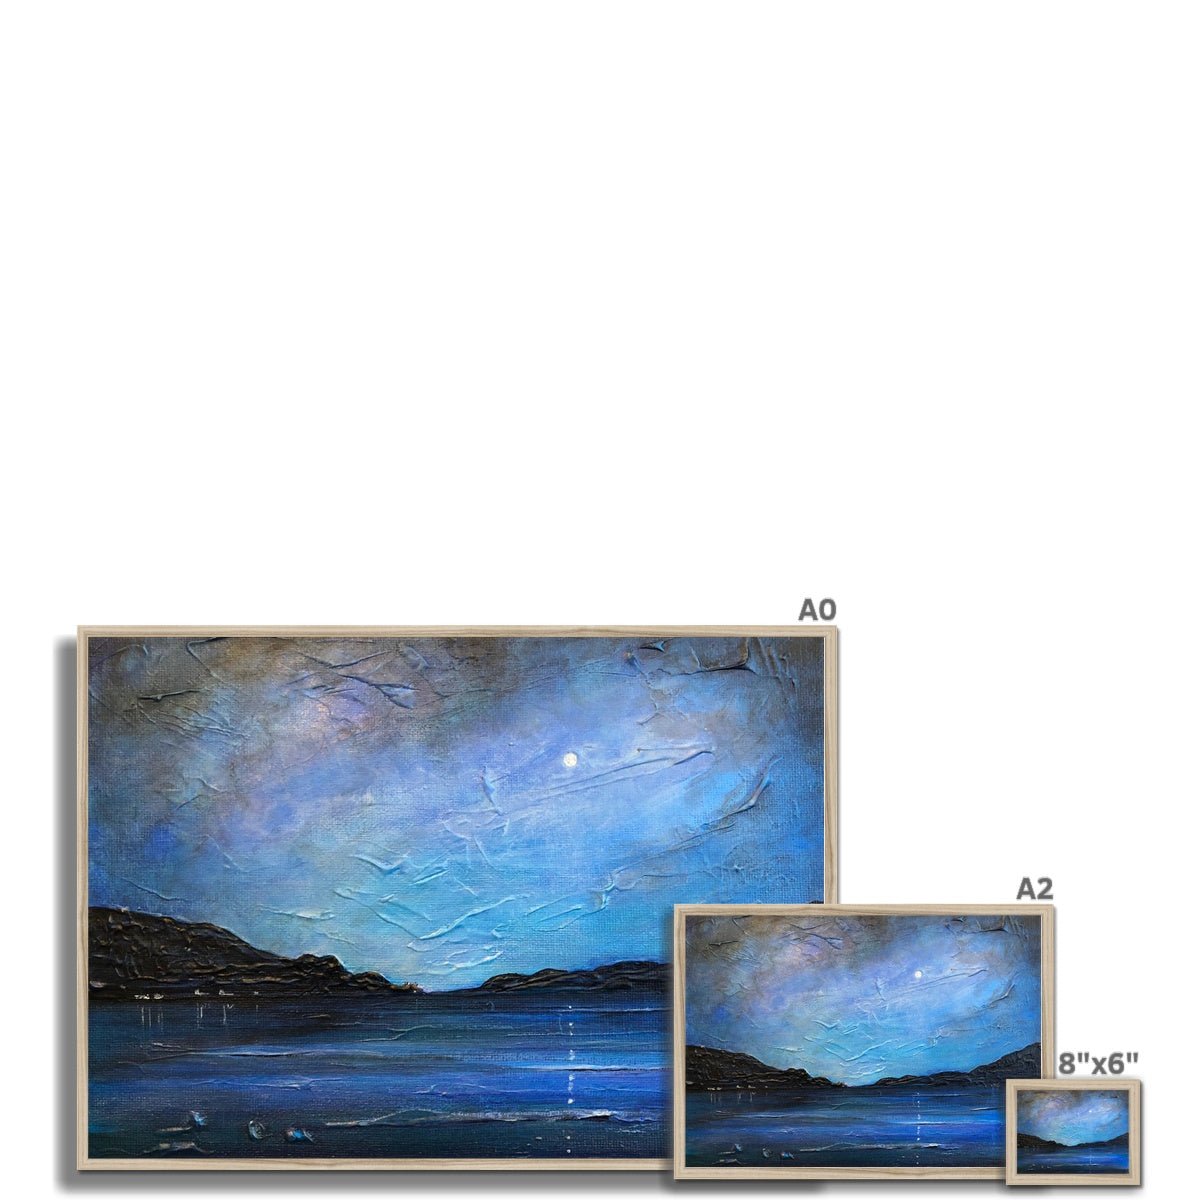 Loch Ness Moonlight Painting | Framed Prints From Scotland-Framed Prints-Scottish Lochs & Mountains Art Gallery-Paintings, Prints, Homeware, Art Gifts From Scotland By Scottish Artist Kevin Hunter